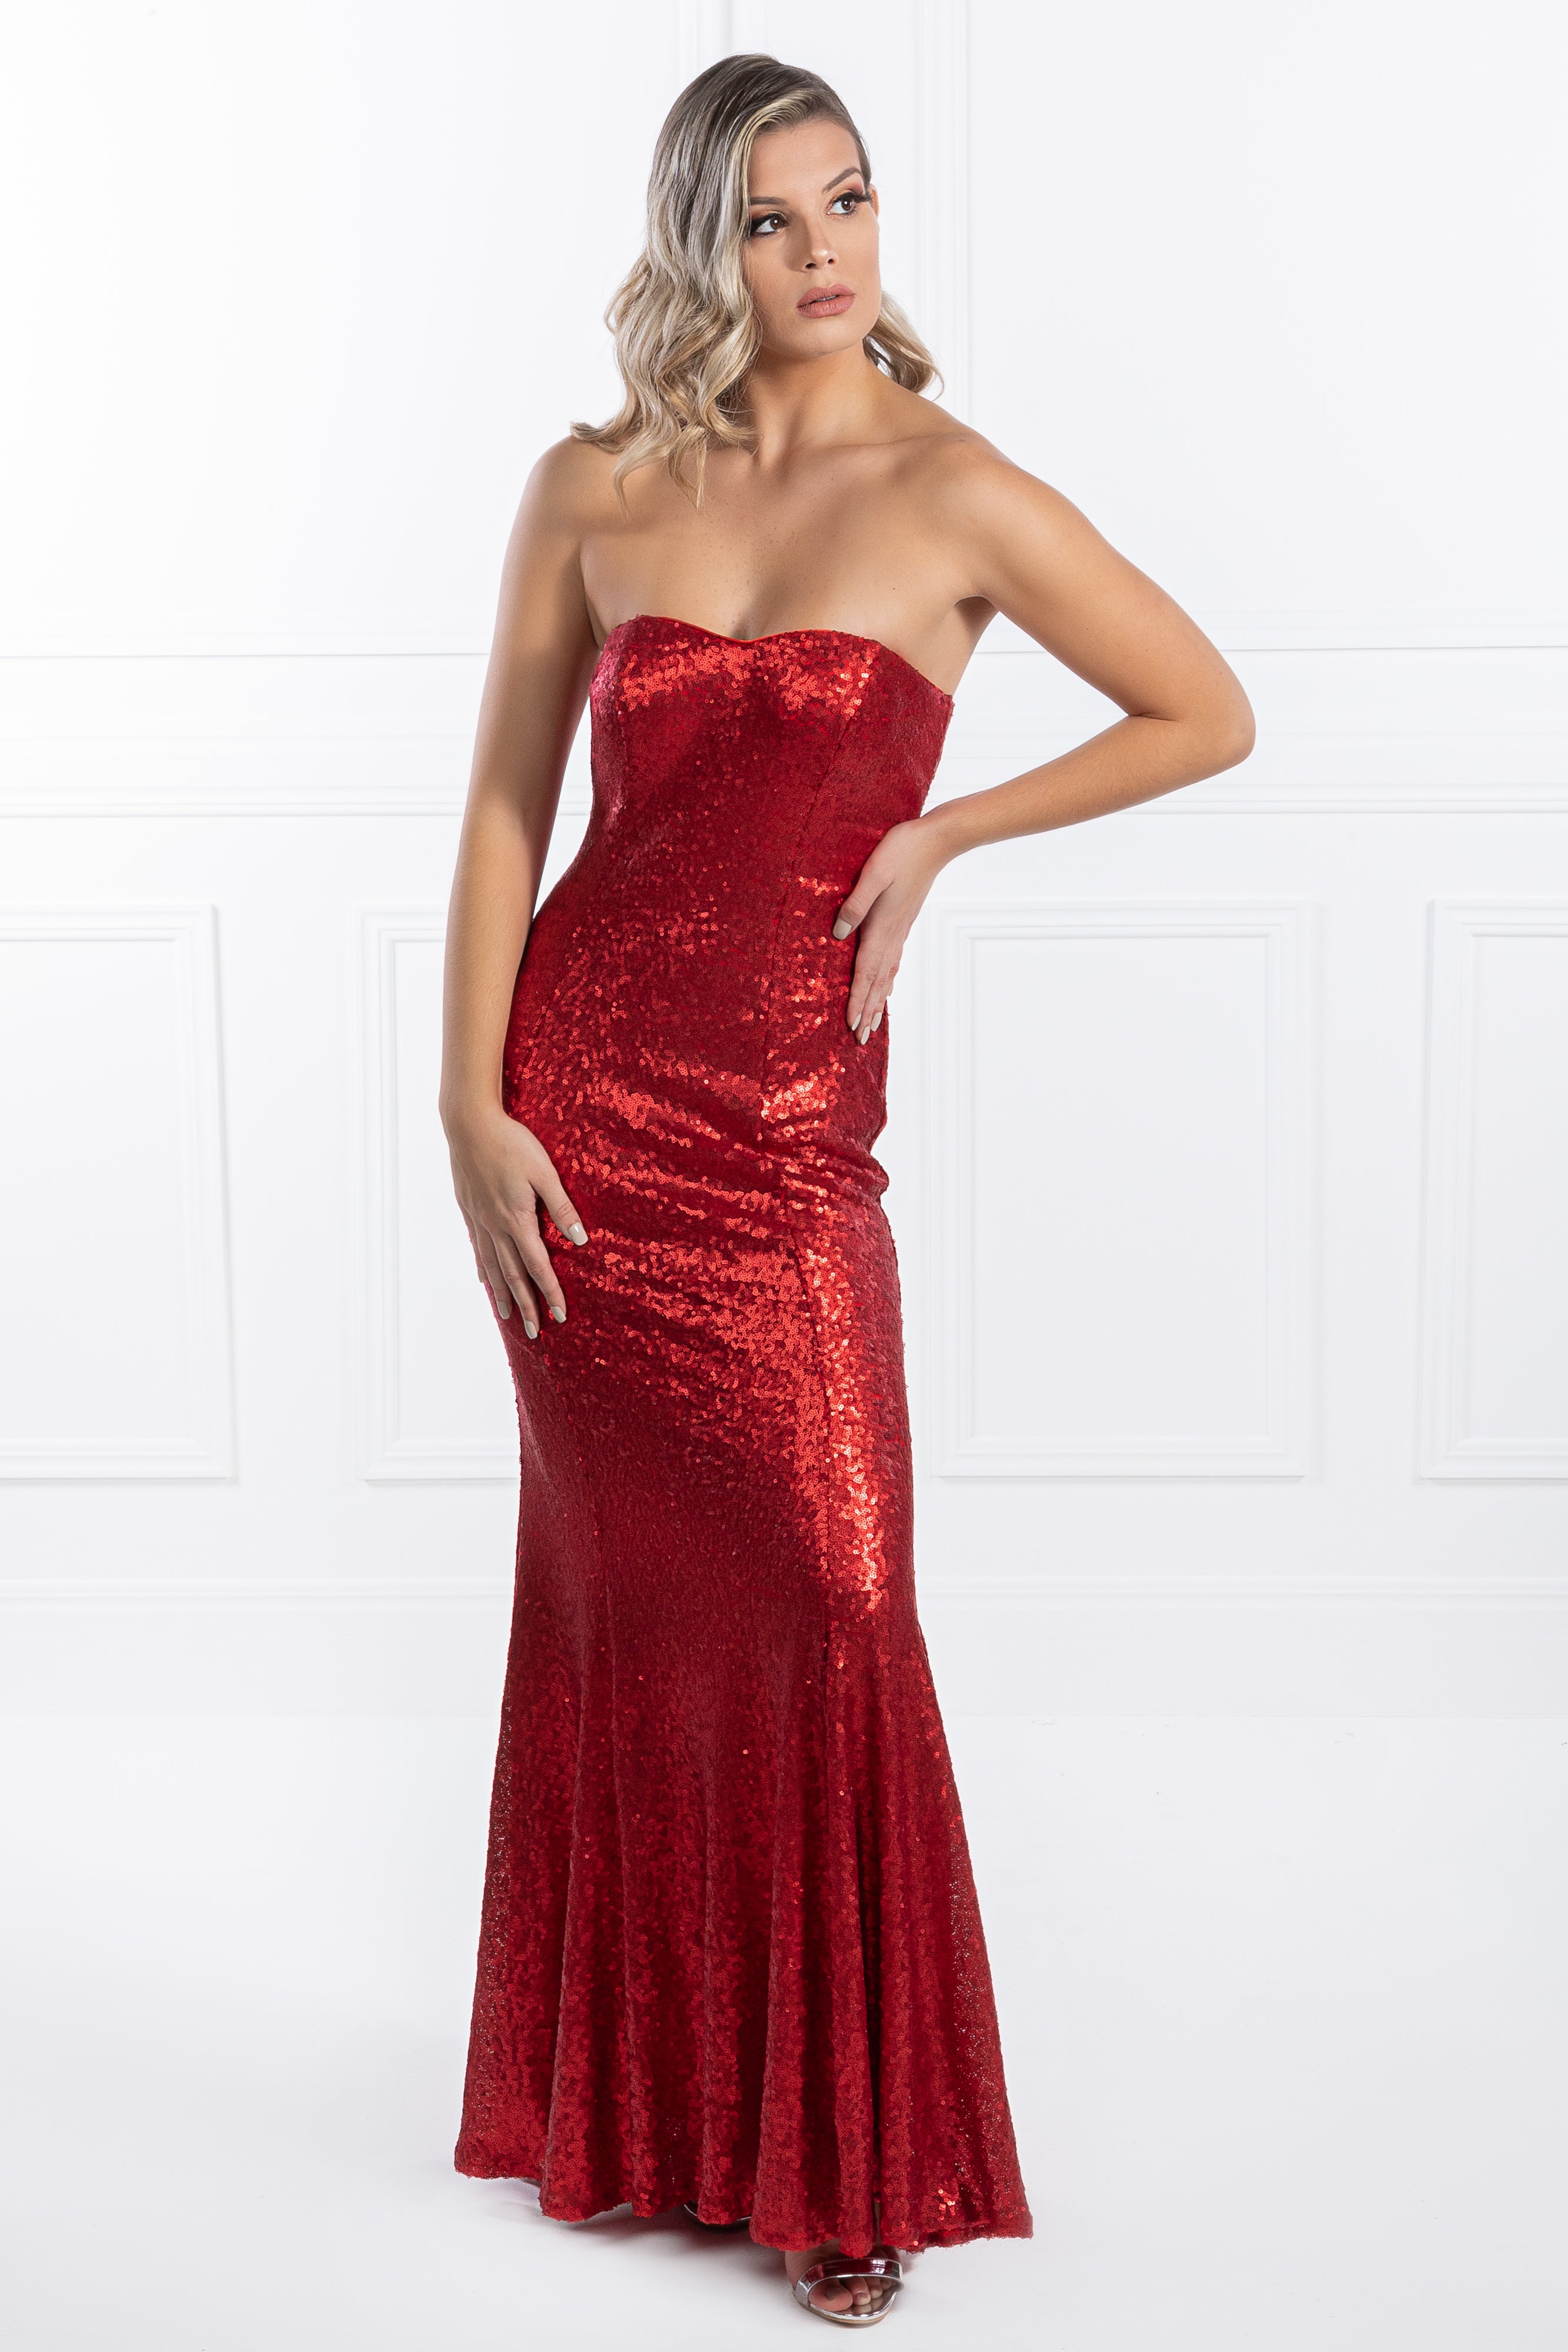 Honey Couture LIBBY Red Strapless Sequin Formal Dress